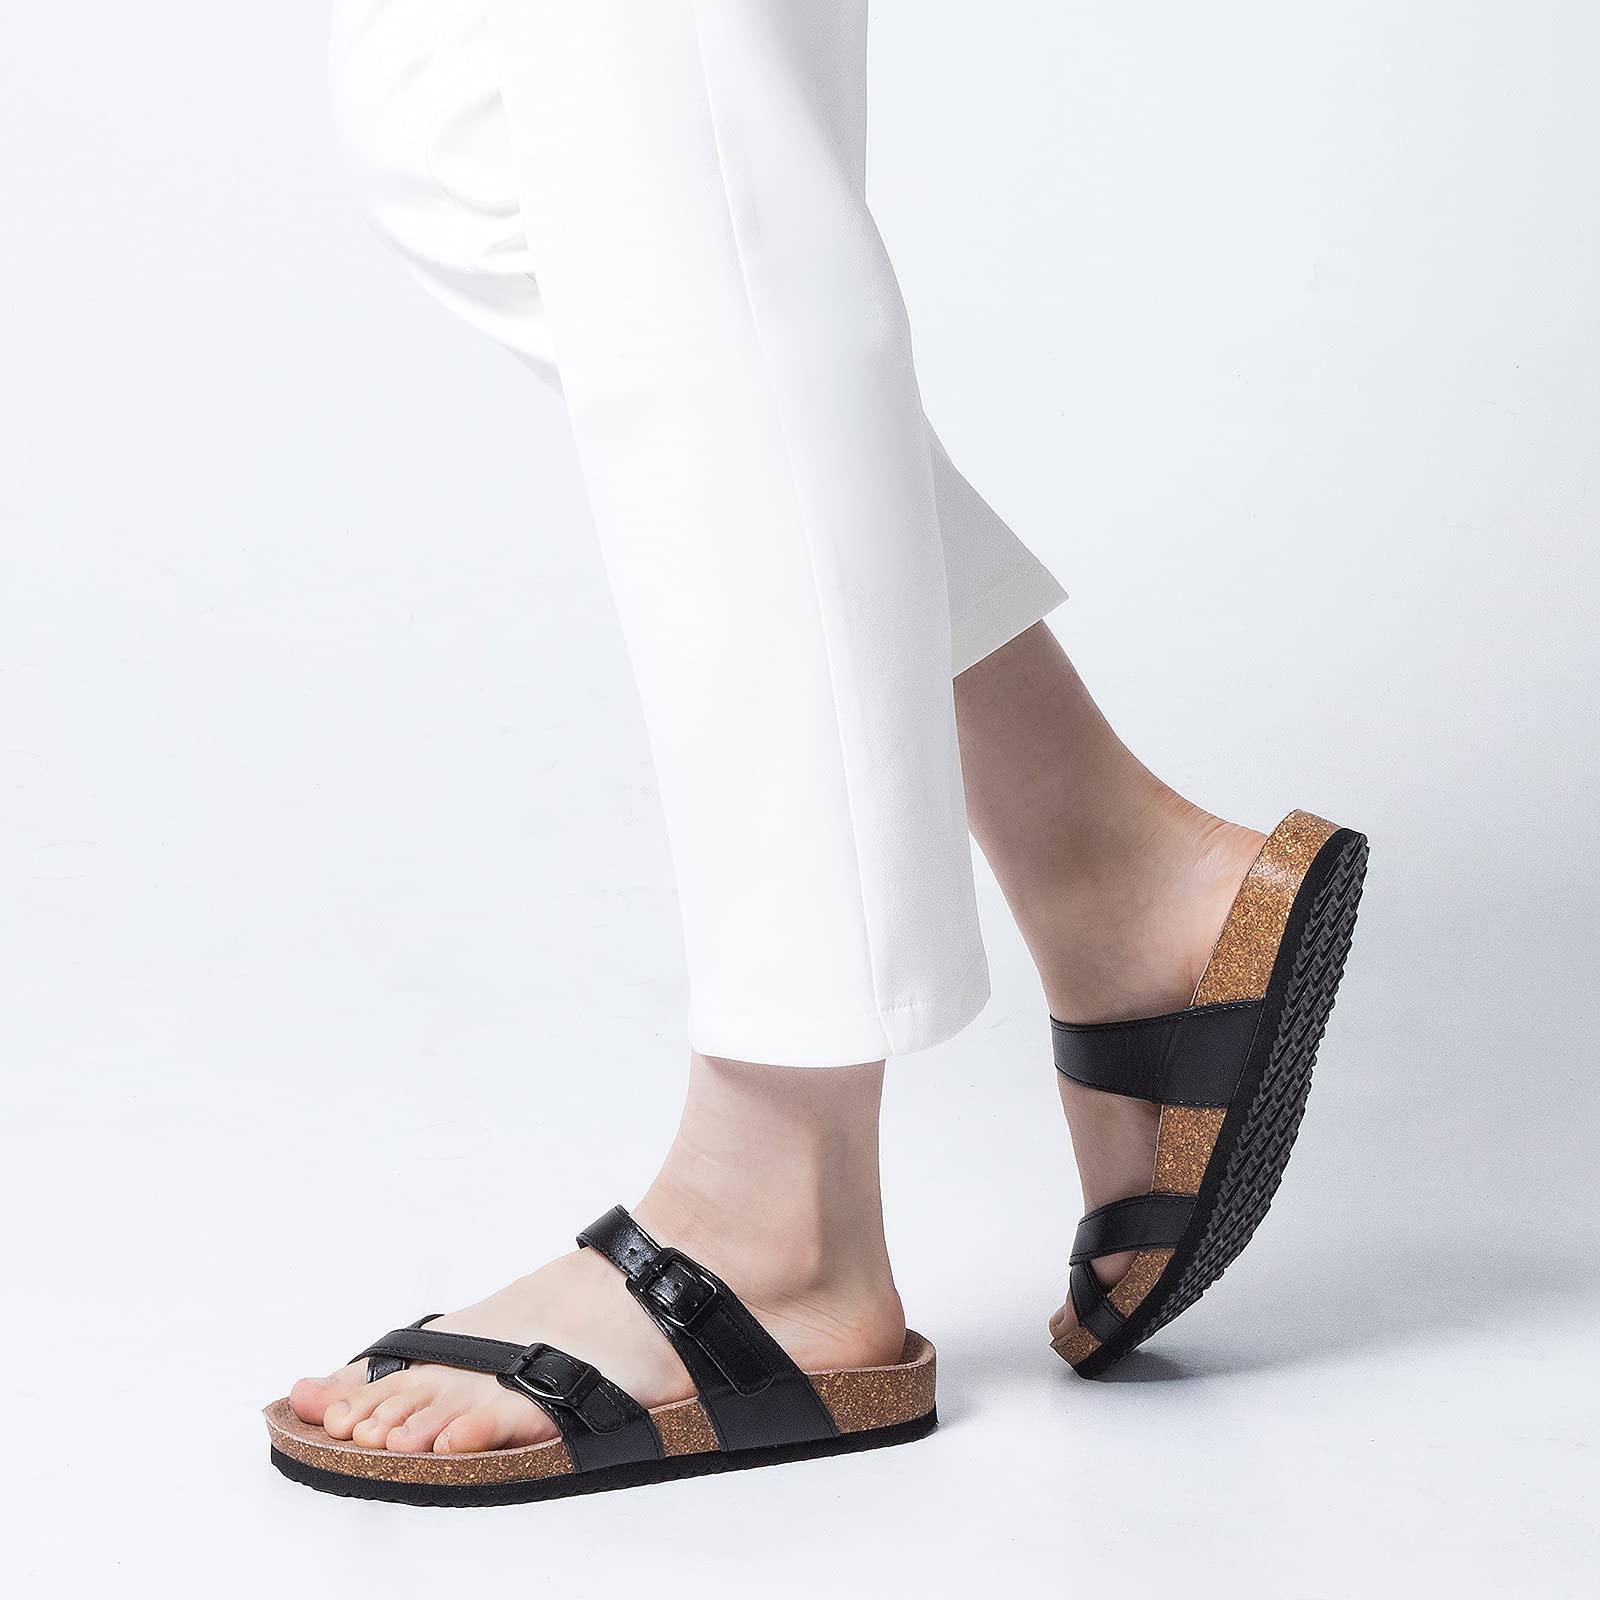 Arch Support Flip Flop Sandals with Cork Footbed